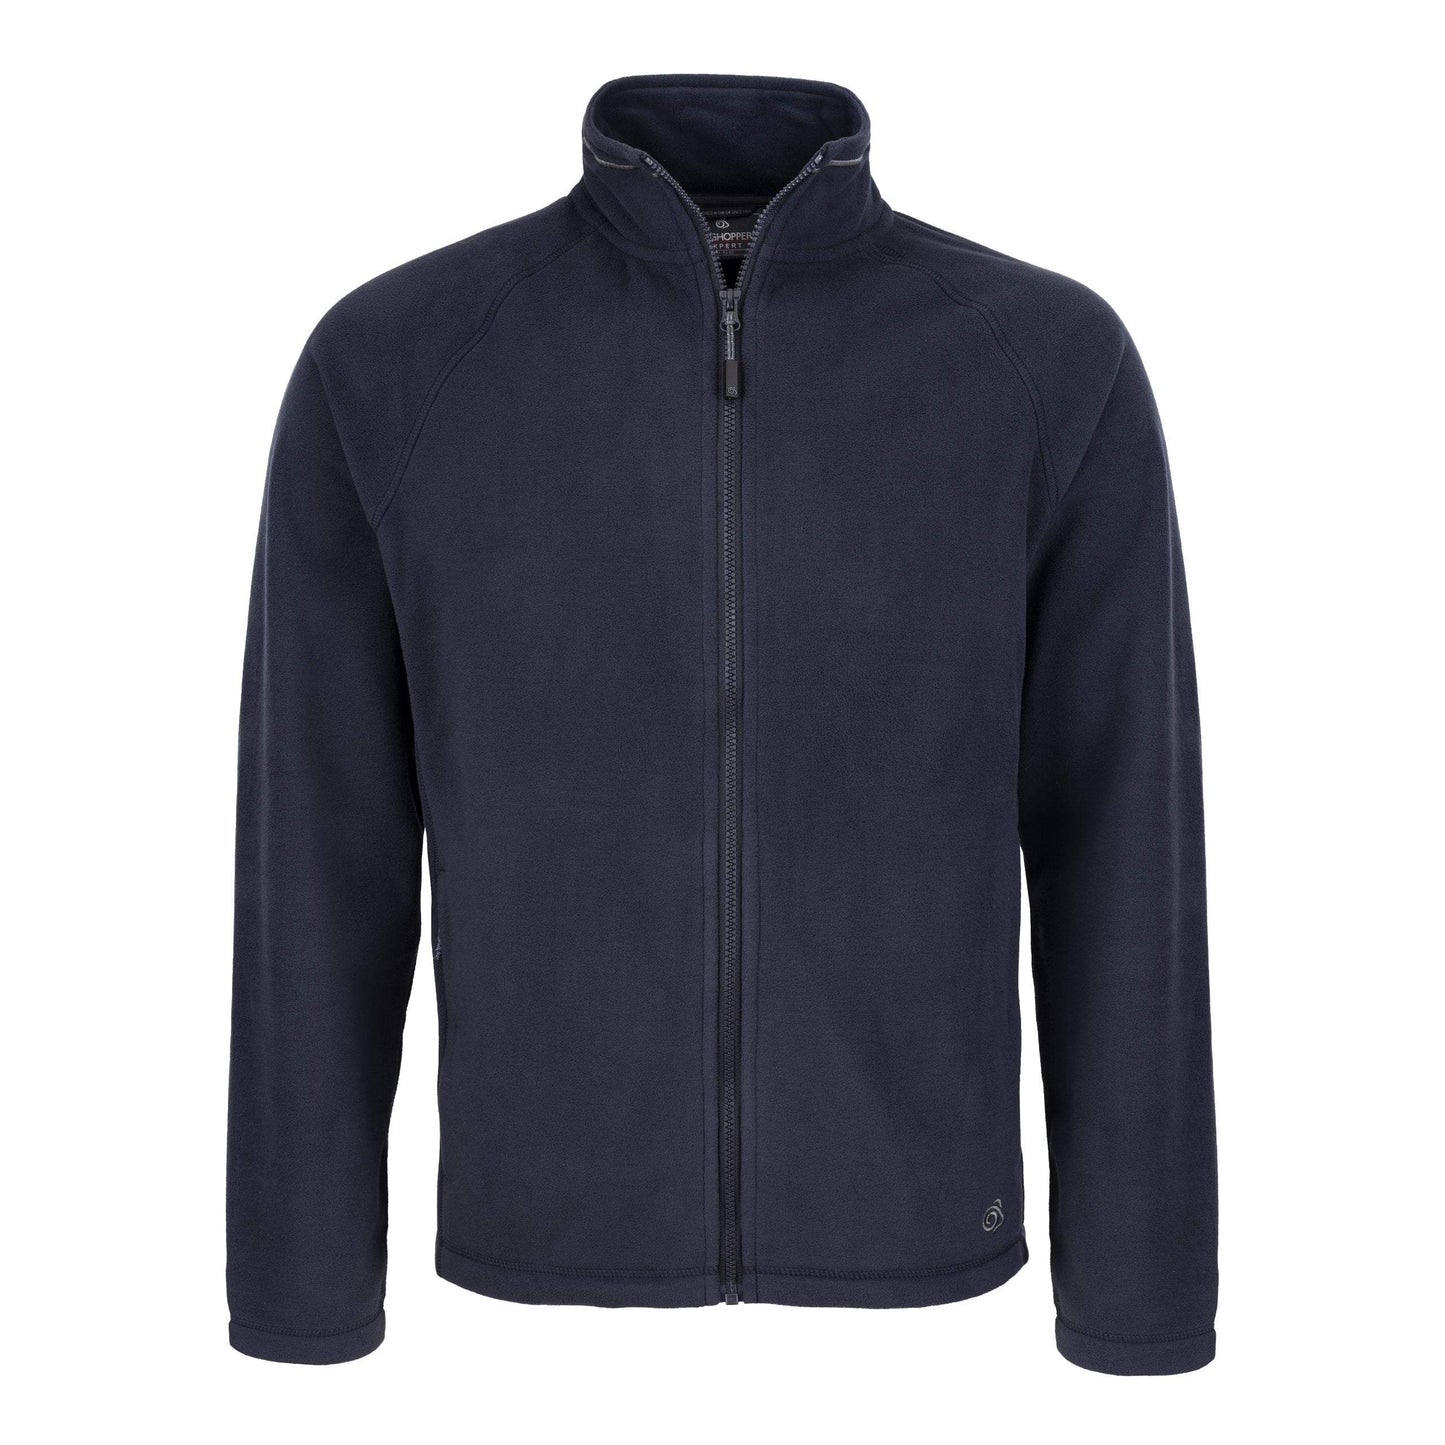 Men's Expert Corey 200 Fleece Jacket by Craghoppers - The Luxury Promotional Gifts Company Limited